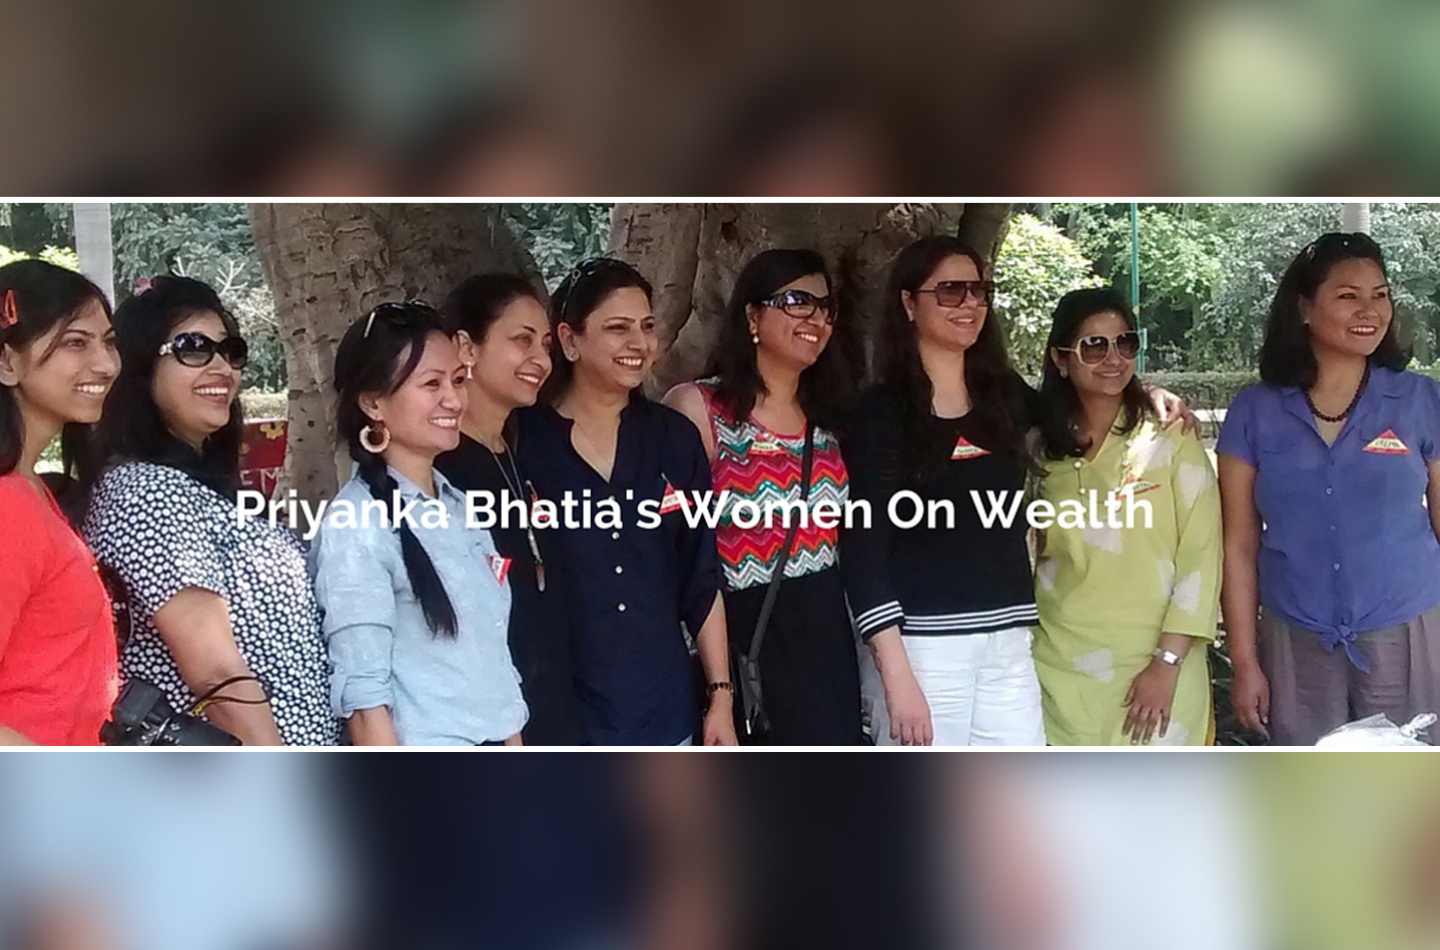 How women can be rich & wealthy?